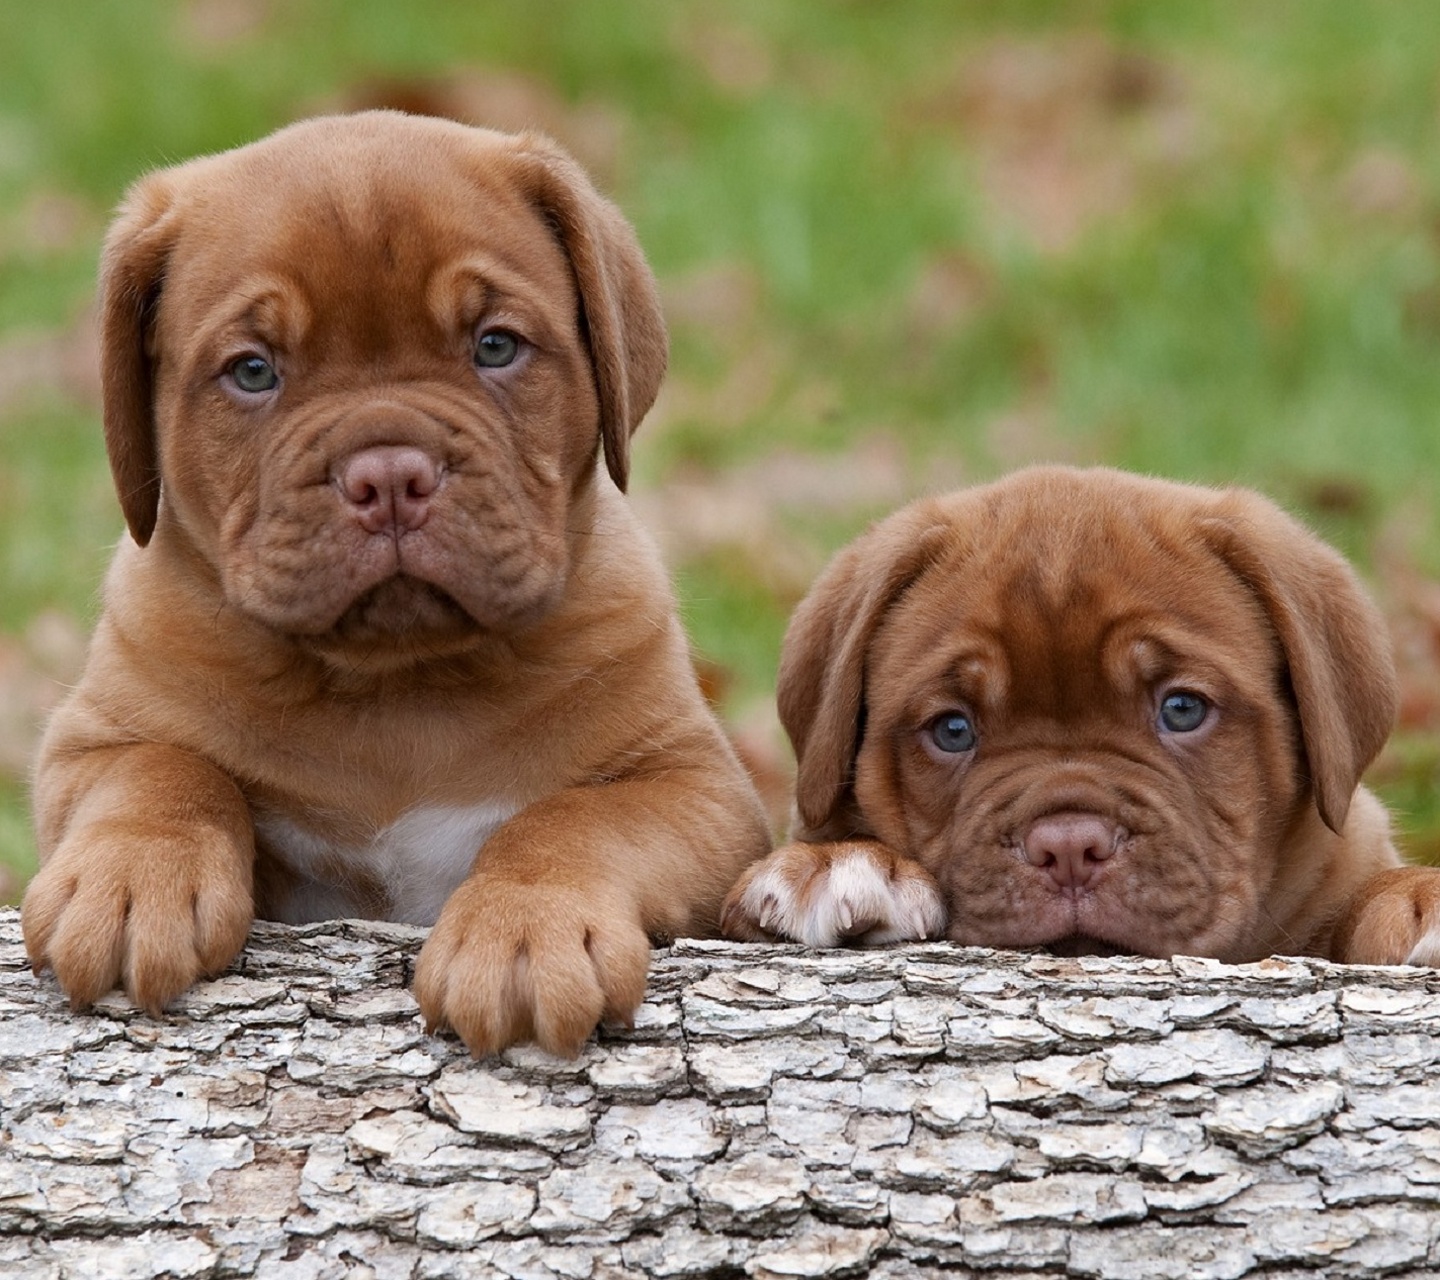 Puppies Wallpaper For Mobile Phones